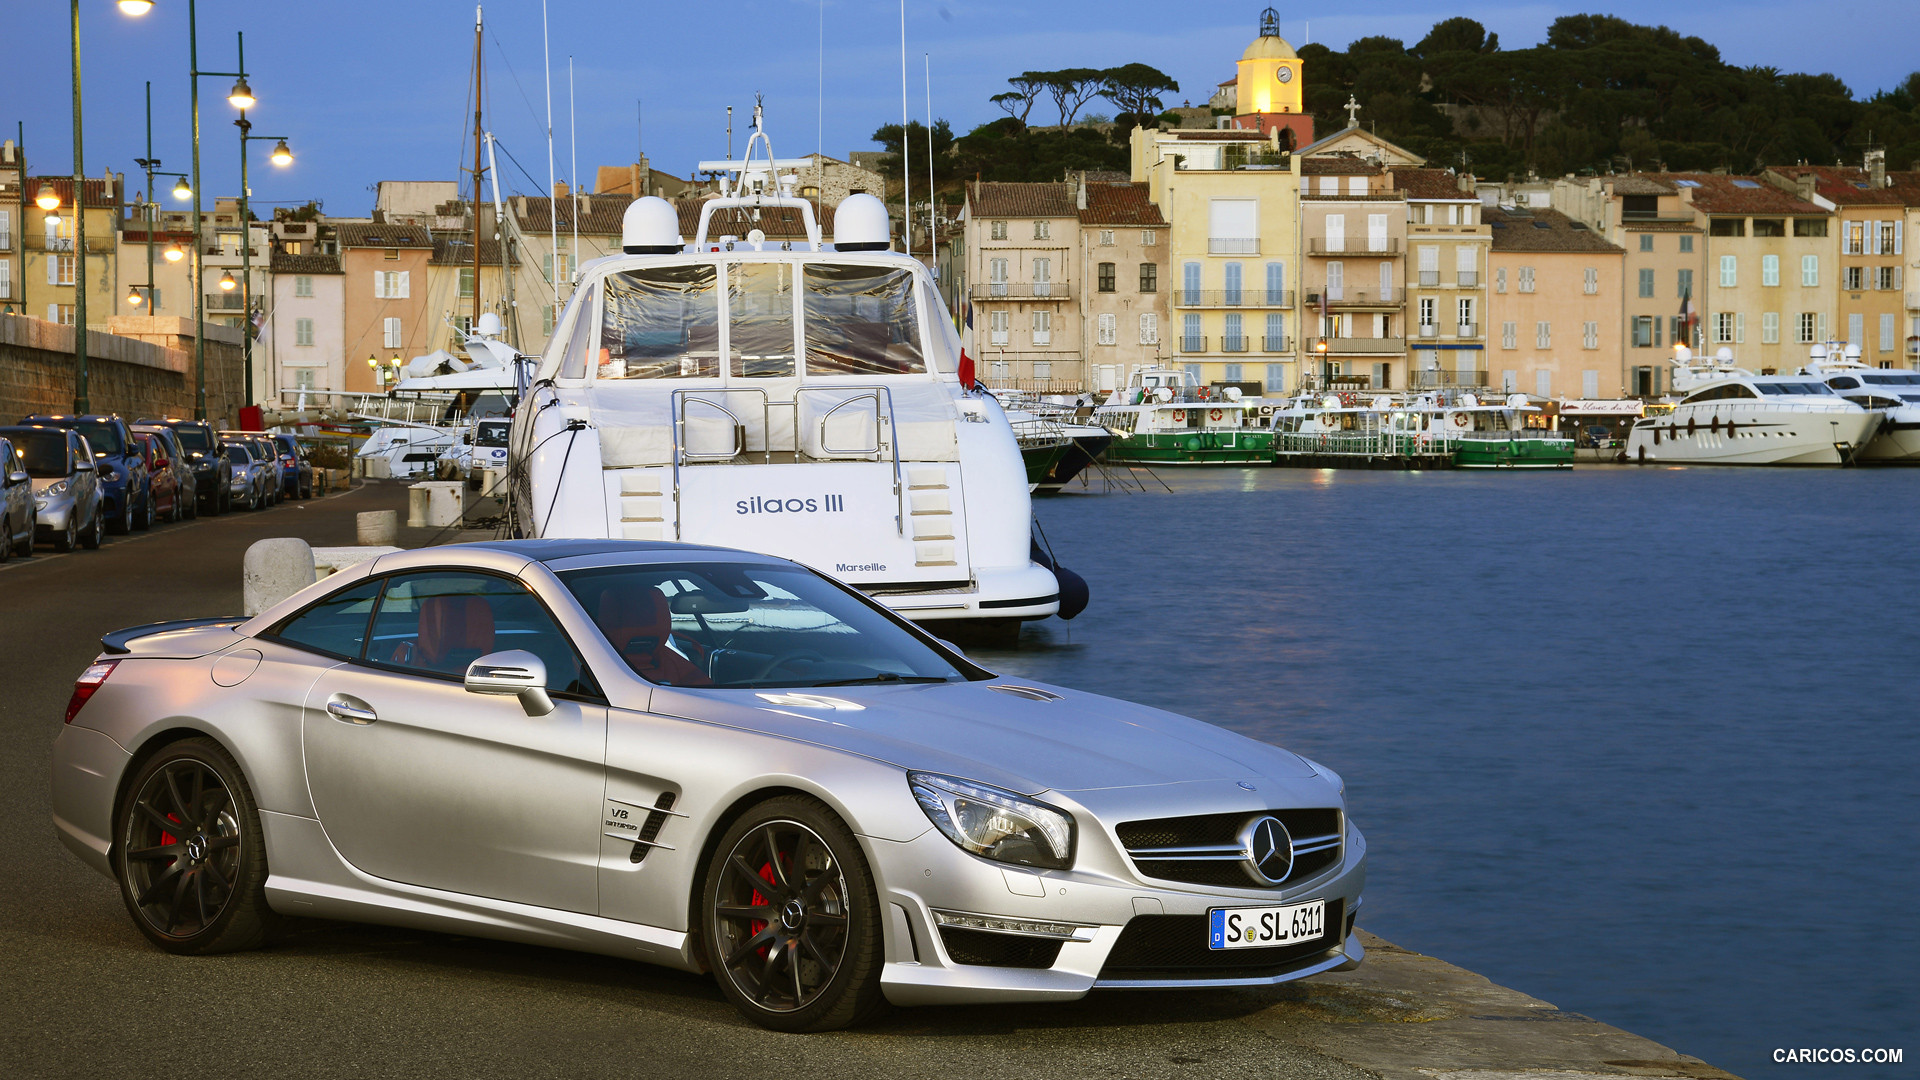 2013 Mercedes-Benz SL63 AMG Silver - Front, #41 of 111